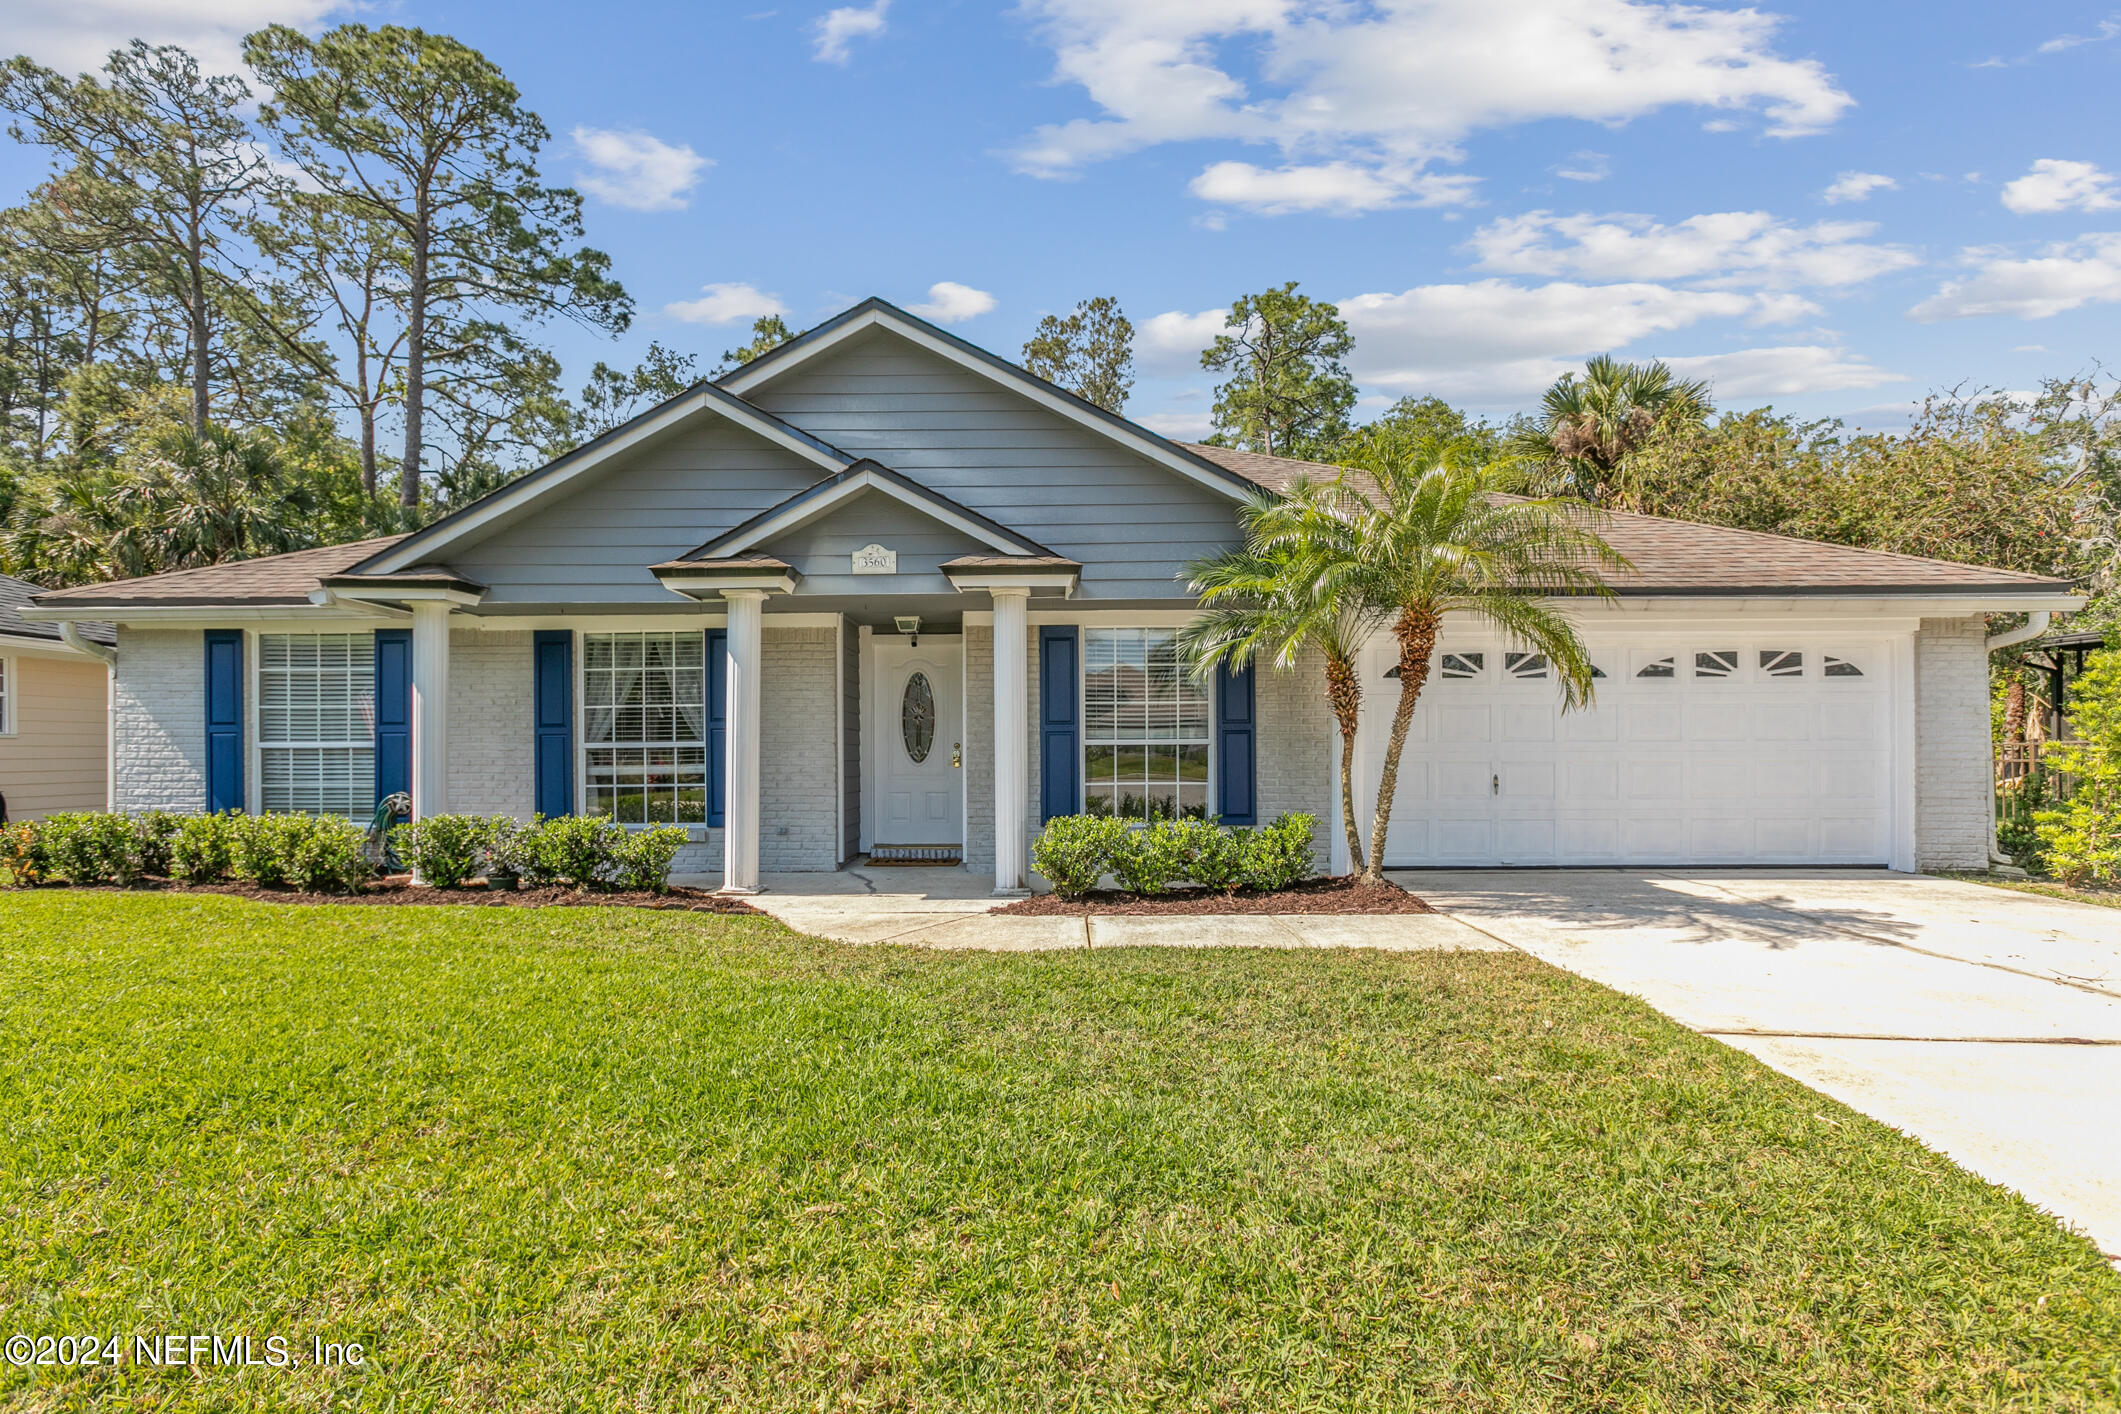 Jacksonville Beach, FL home for sale located at 3560 Sanctuary Boulevard, Jacksonville Beach, FL 32250